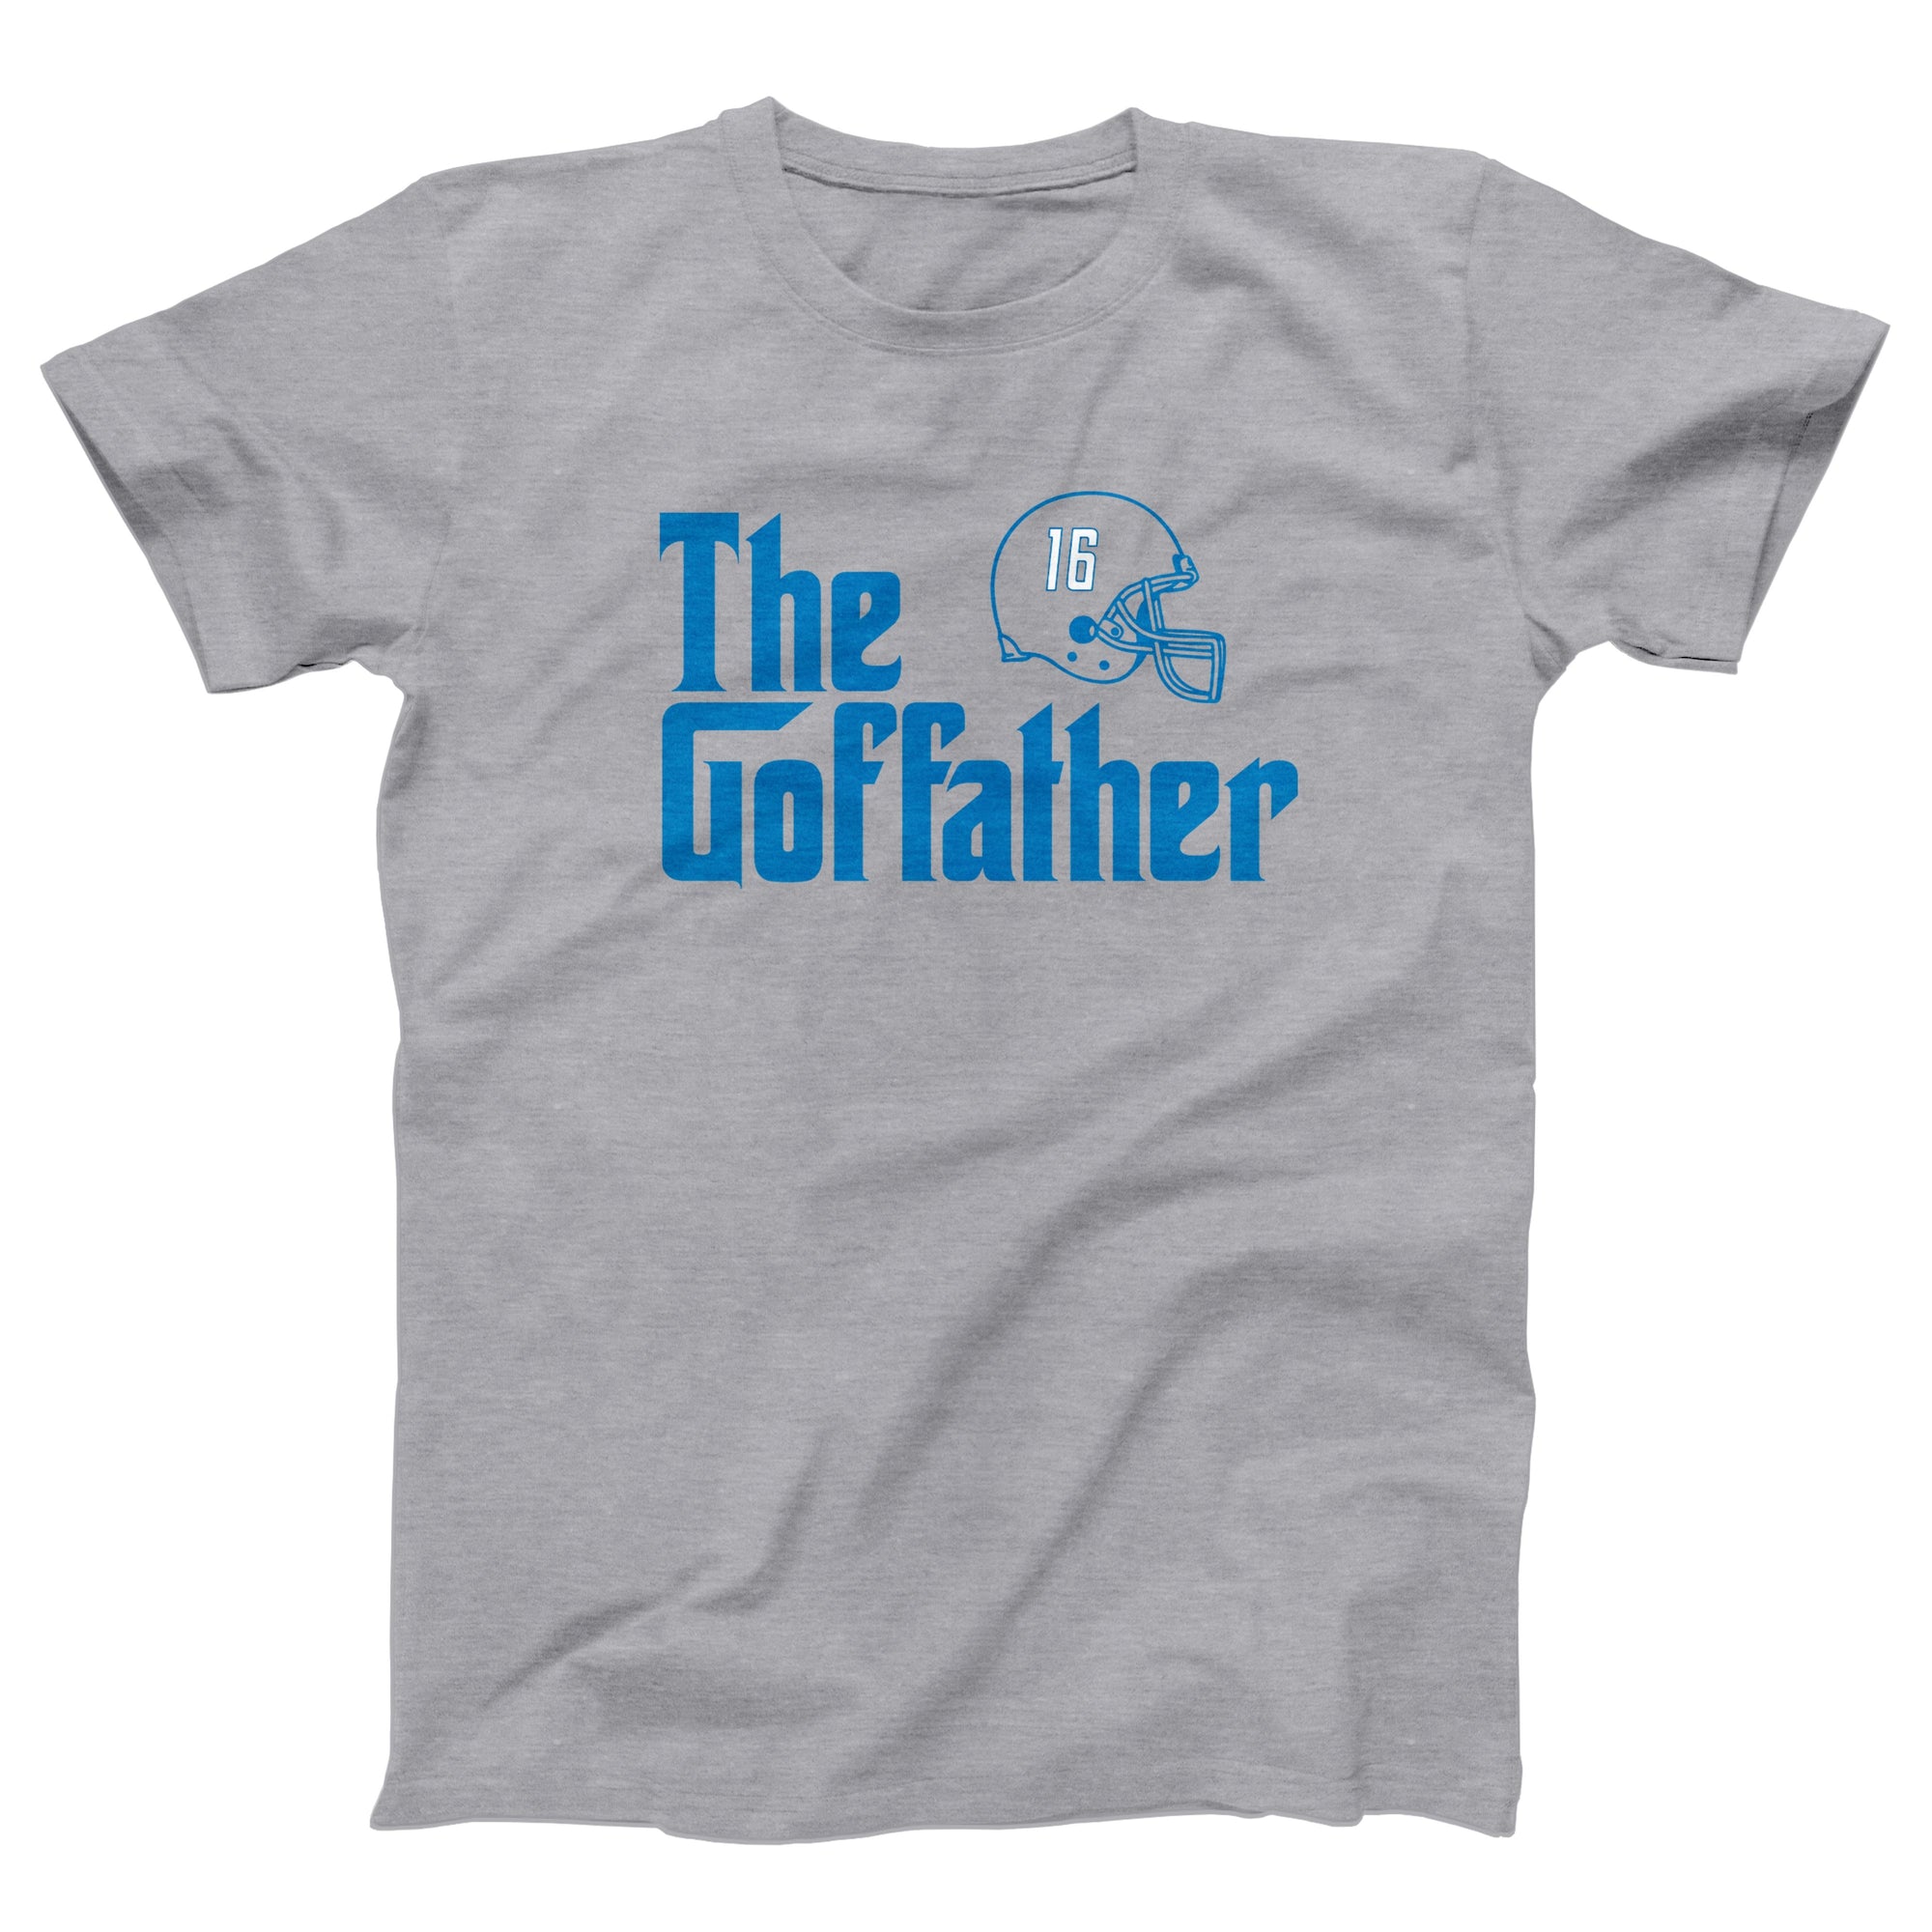 The Goffather Adult Unisex T-Shirt - Twisted Gorilla